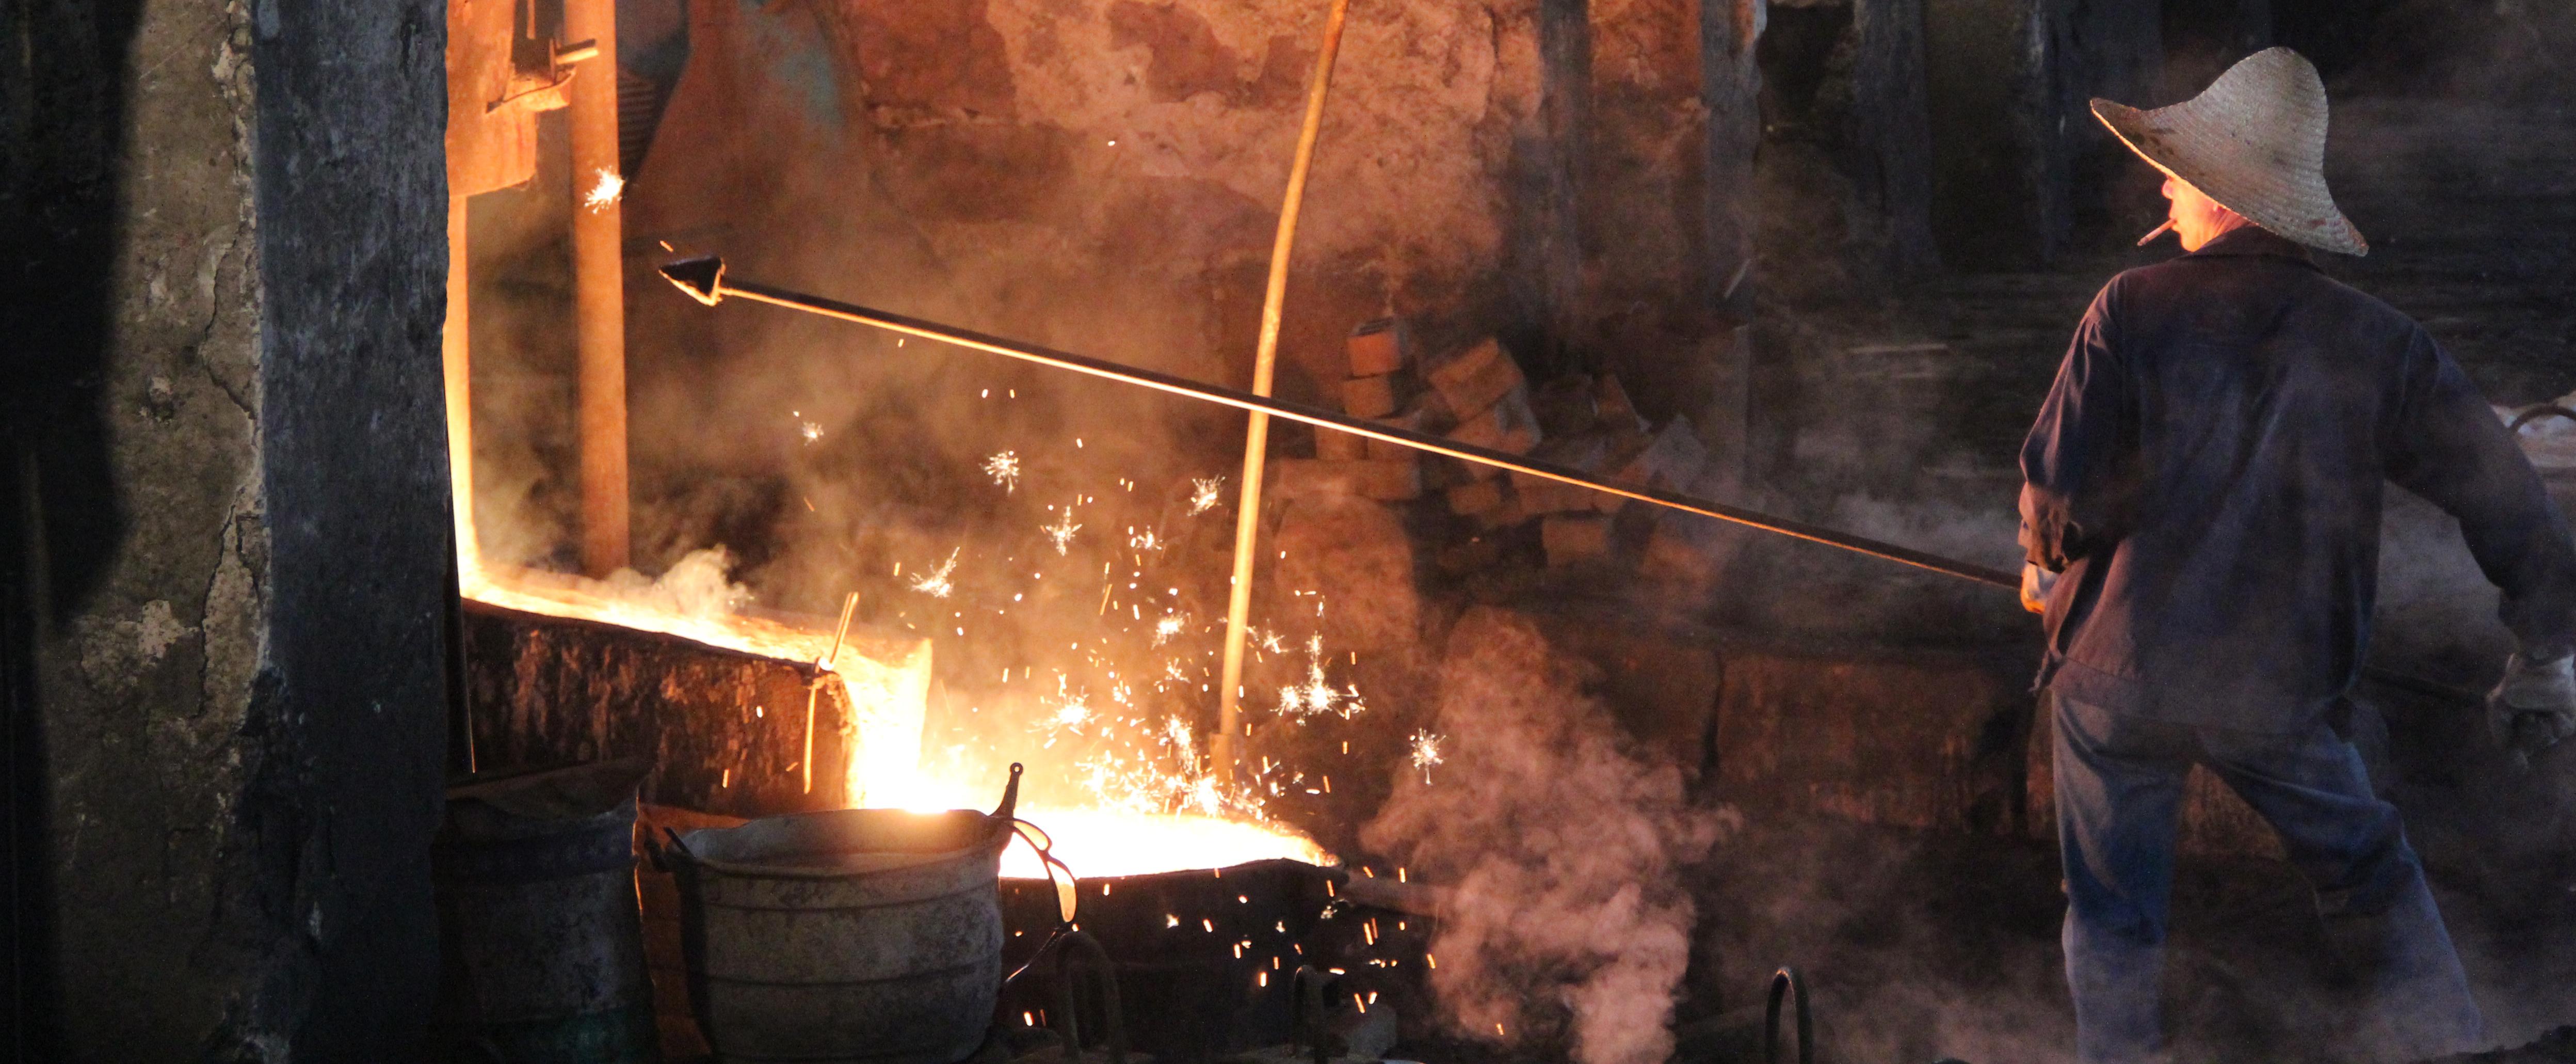 Elizabeth Kronfield operates in a foundry with molten iron.